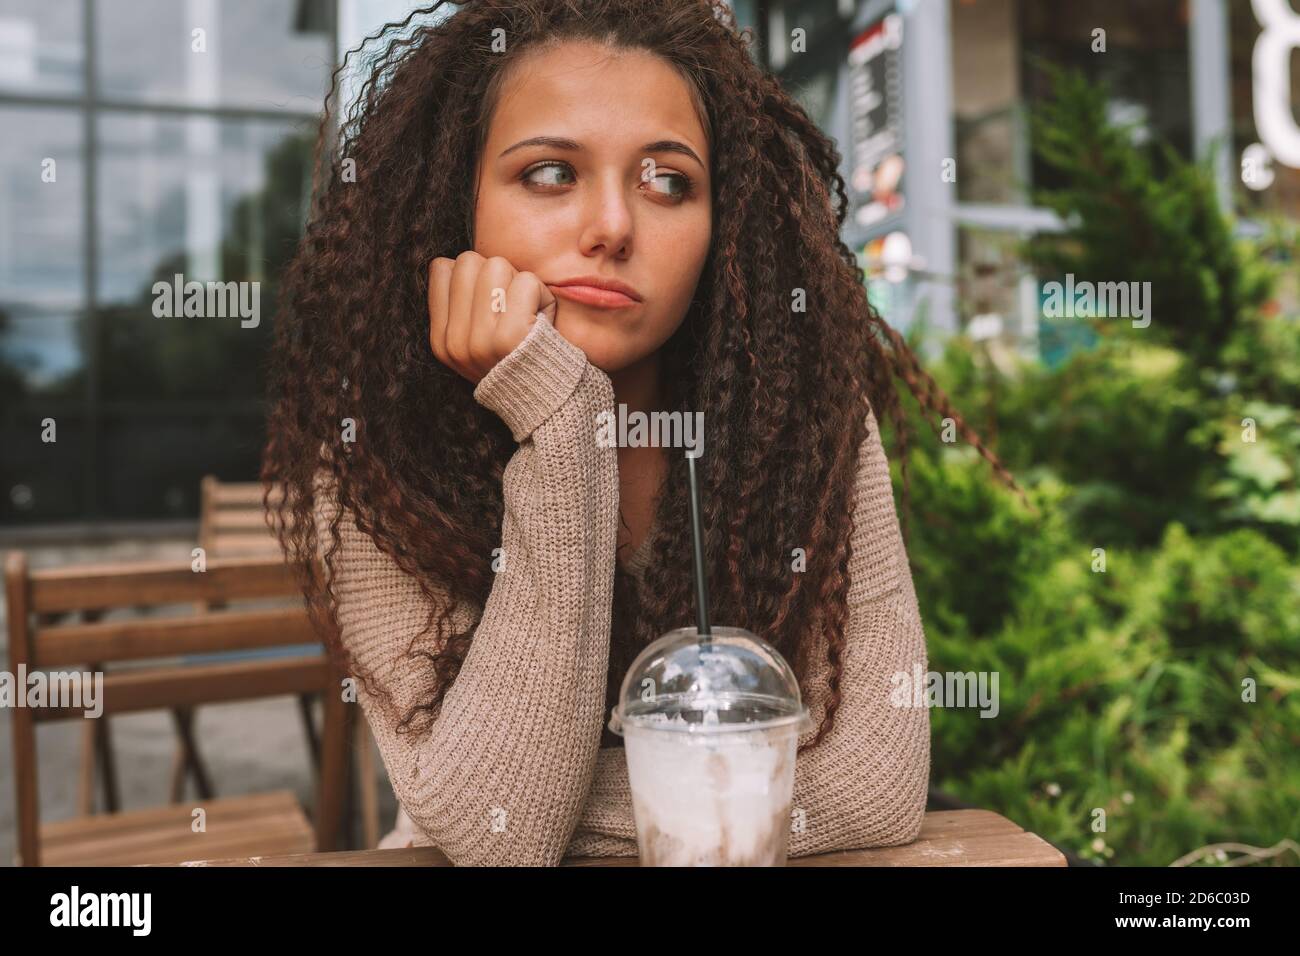 Sad young woman waiting someone at street cafe. Stock Photo